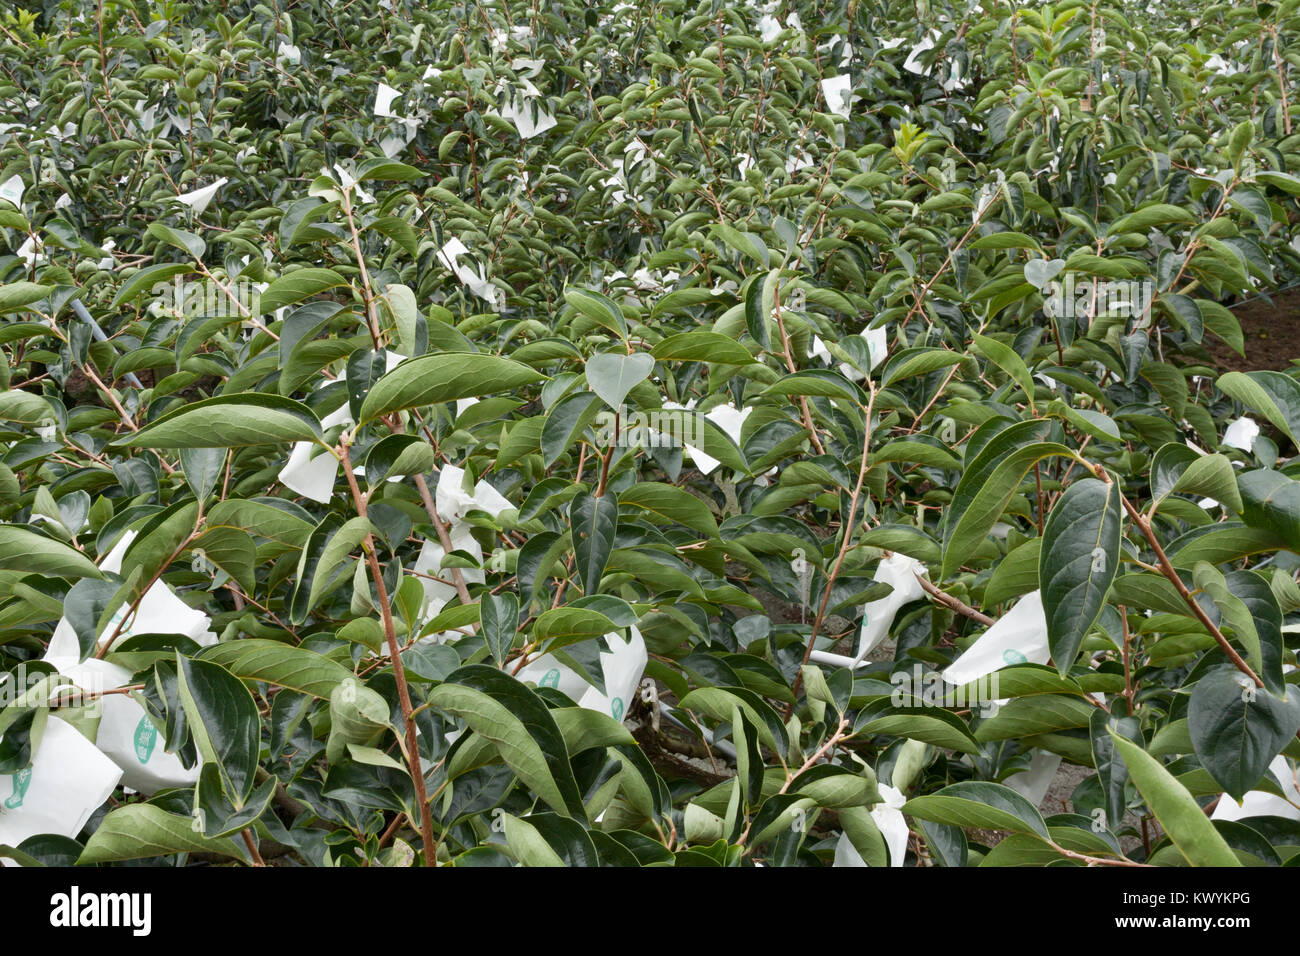 Japanese Fuyu persimmon or kaki tree, growing fruits bagging with paper bags, Heping District, Taichung City, Taiwan Stock Photo